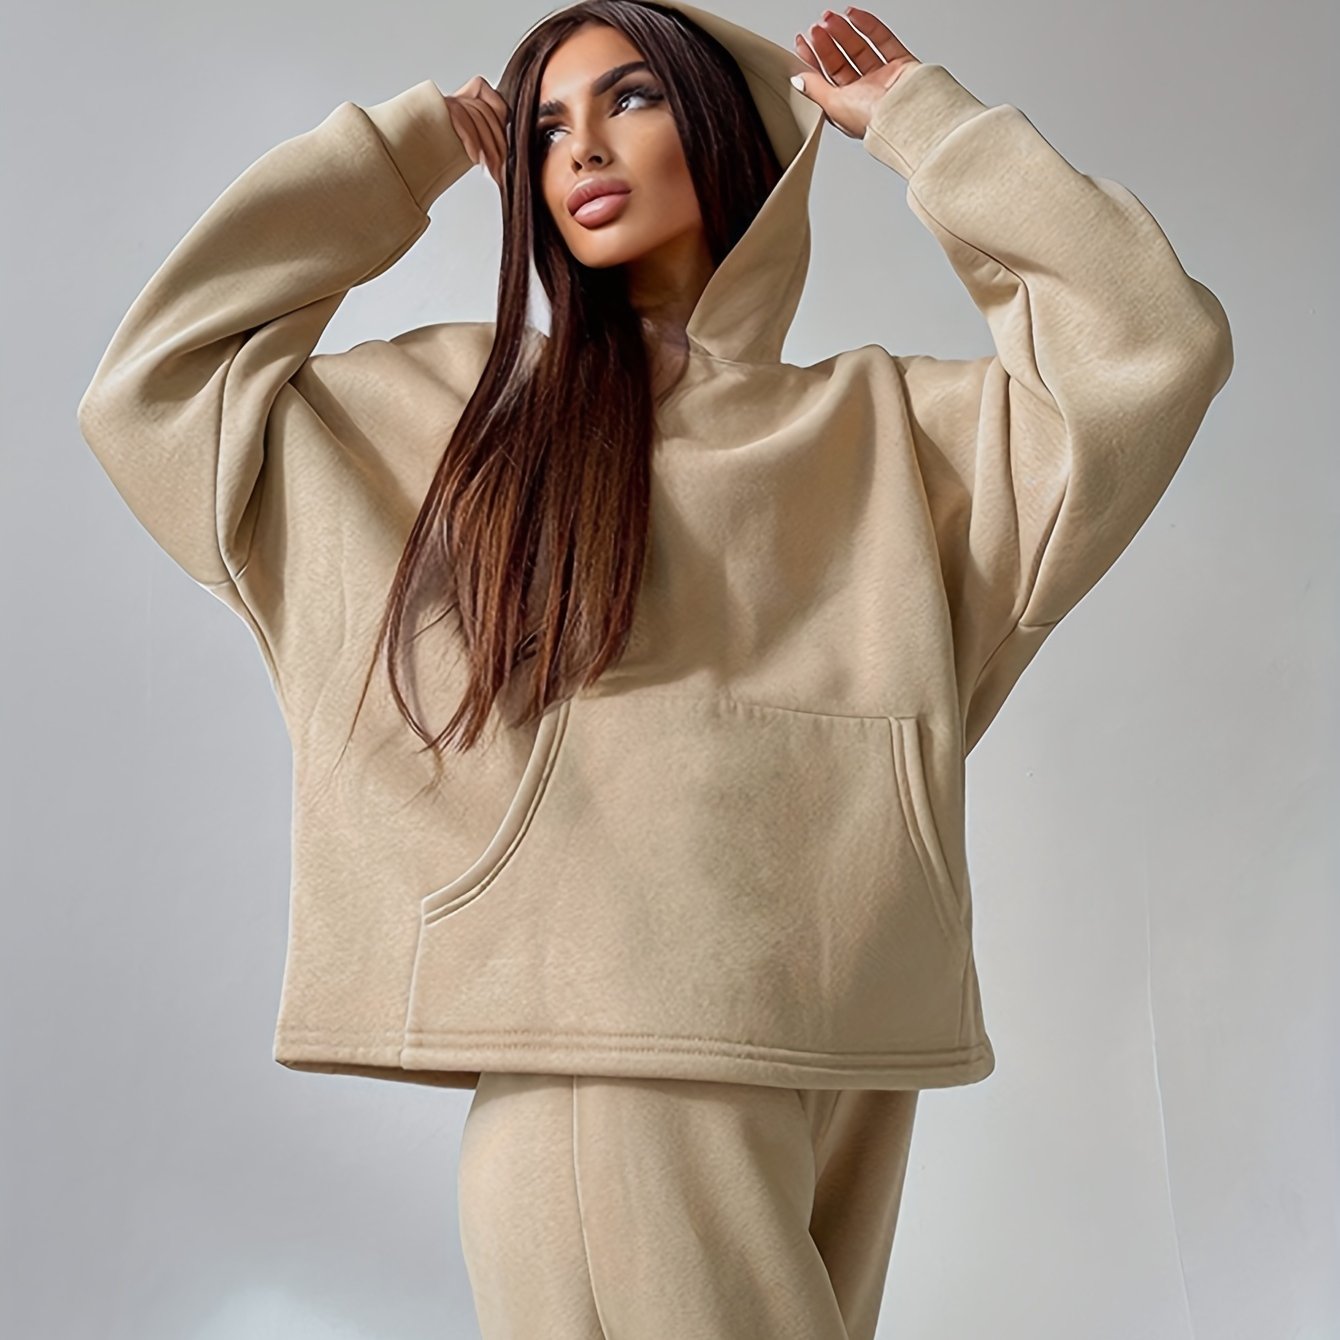 Antmvs Solid Casual Two-piece Set, Long Sleeve Loose Hoodies & Long Length Pants Outfits, Women's Clothing